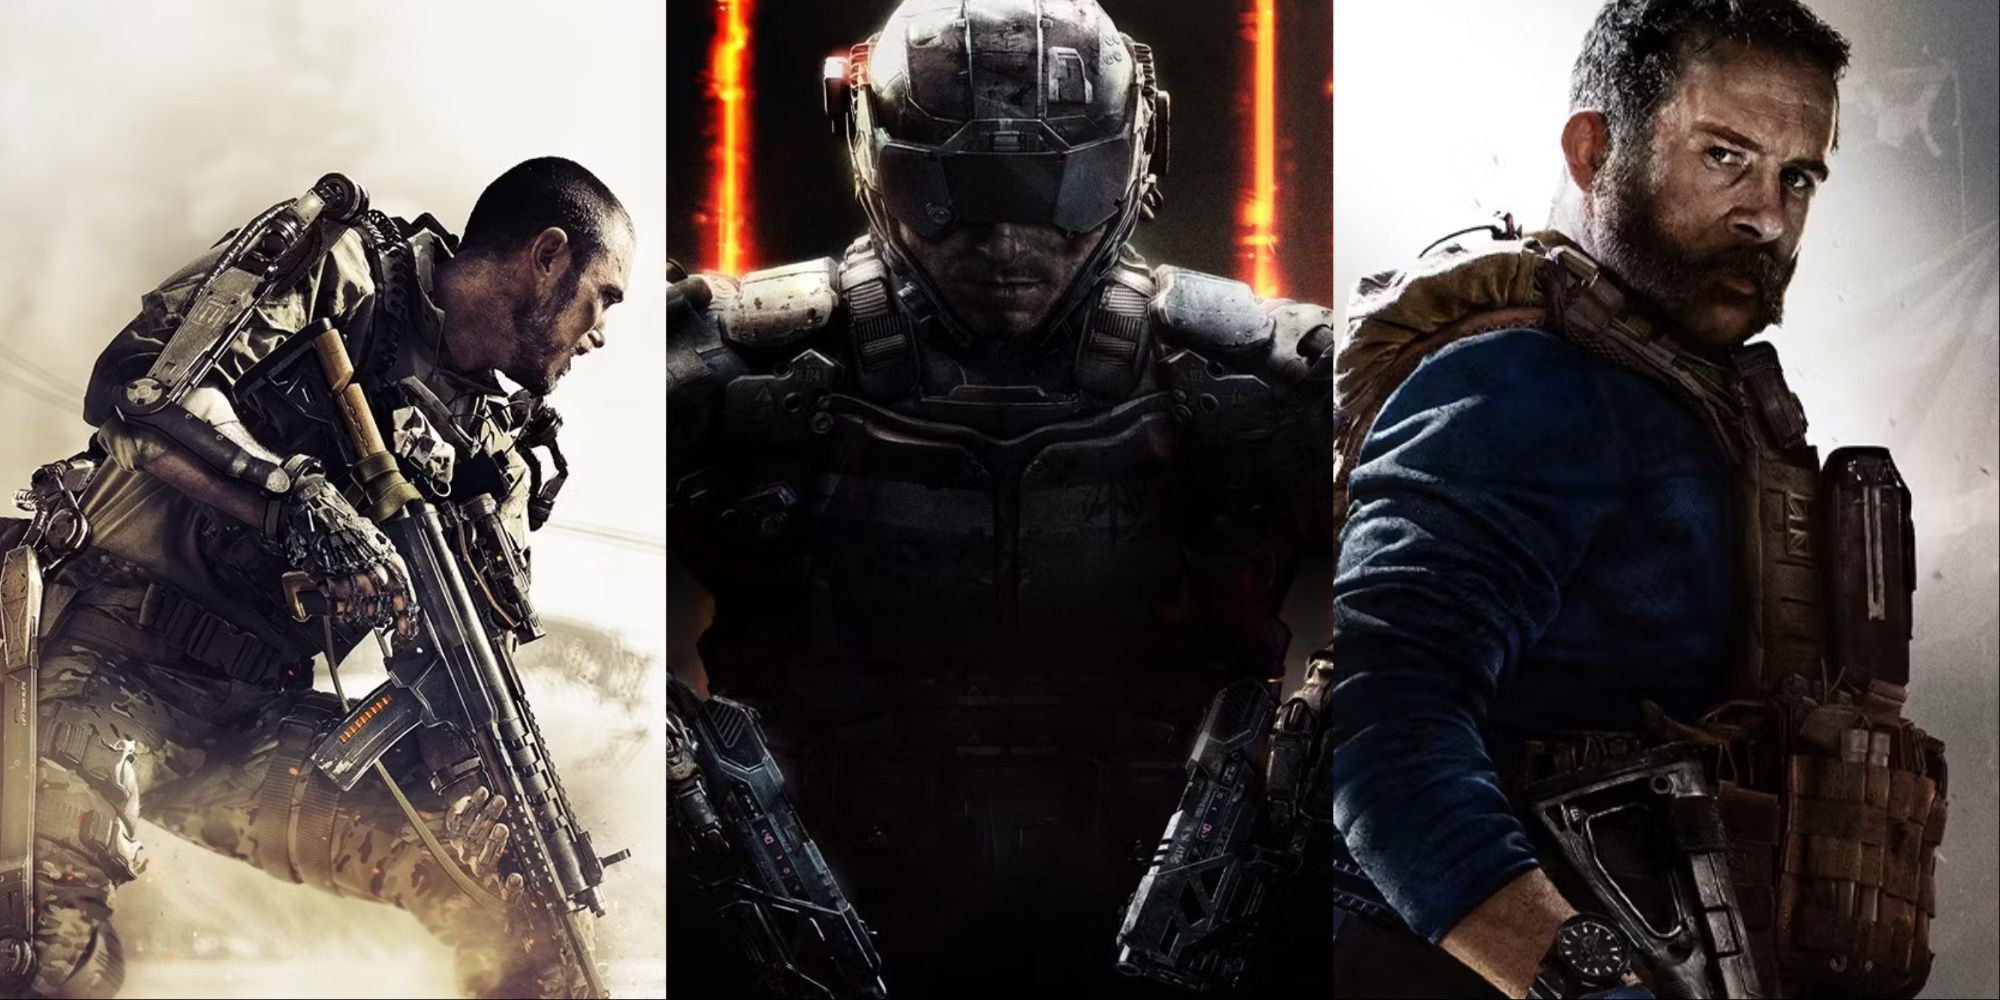 A collage showing the covers of Advanced Warfare, Black Ops 3, and Modern Warfare's reboot.